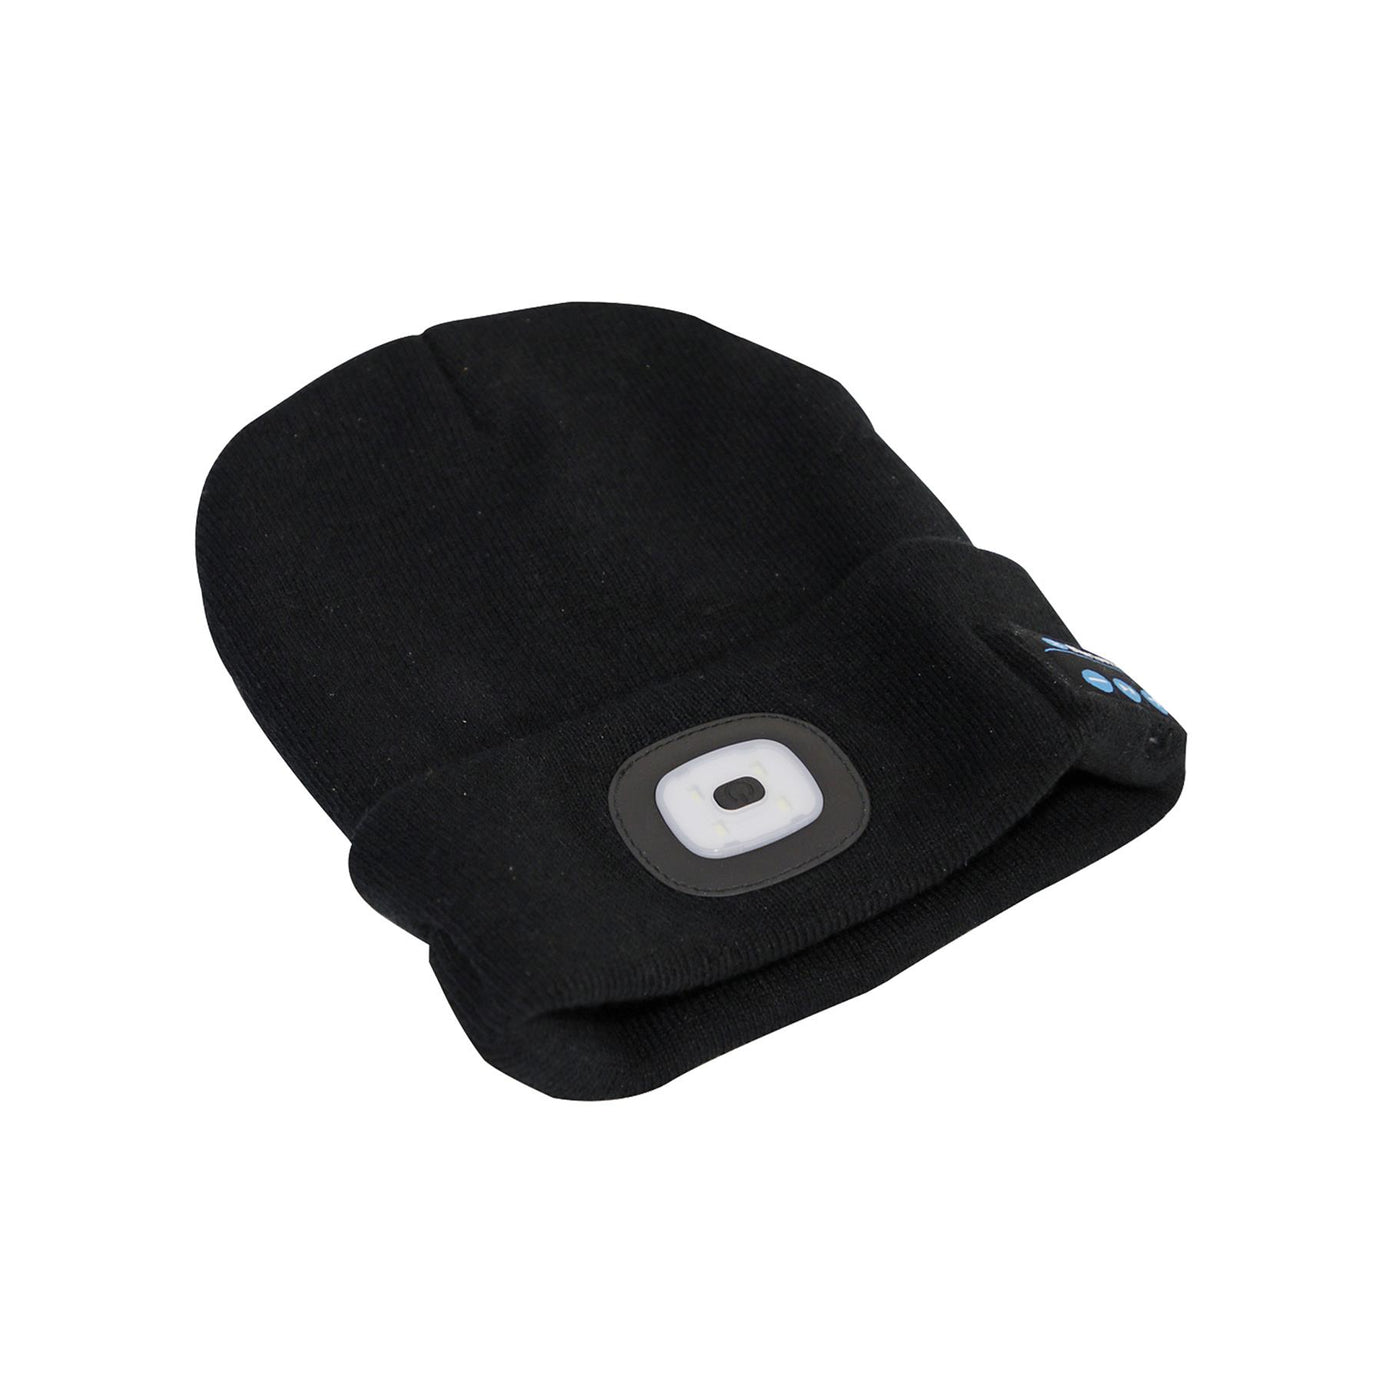 Sealey Beanie Hat 4 SMD LED USB R/Charge with Wireless Headphones